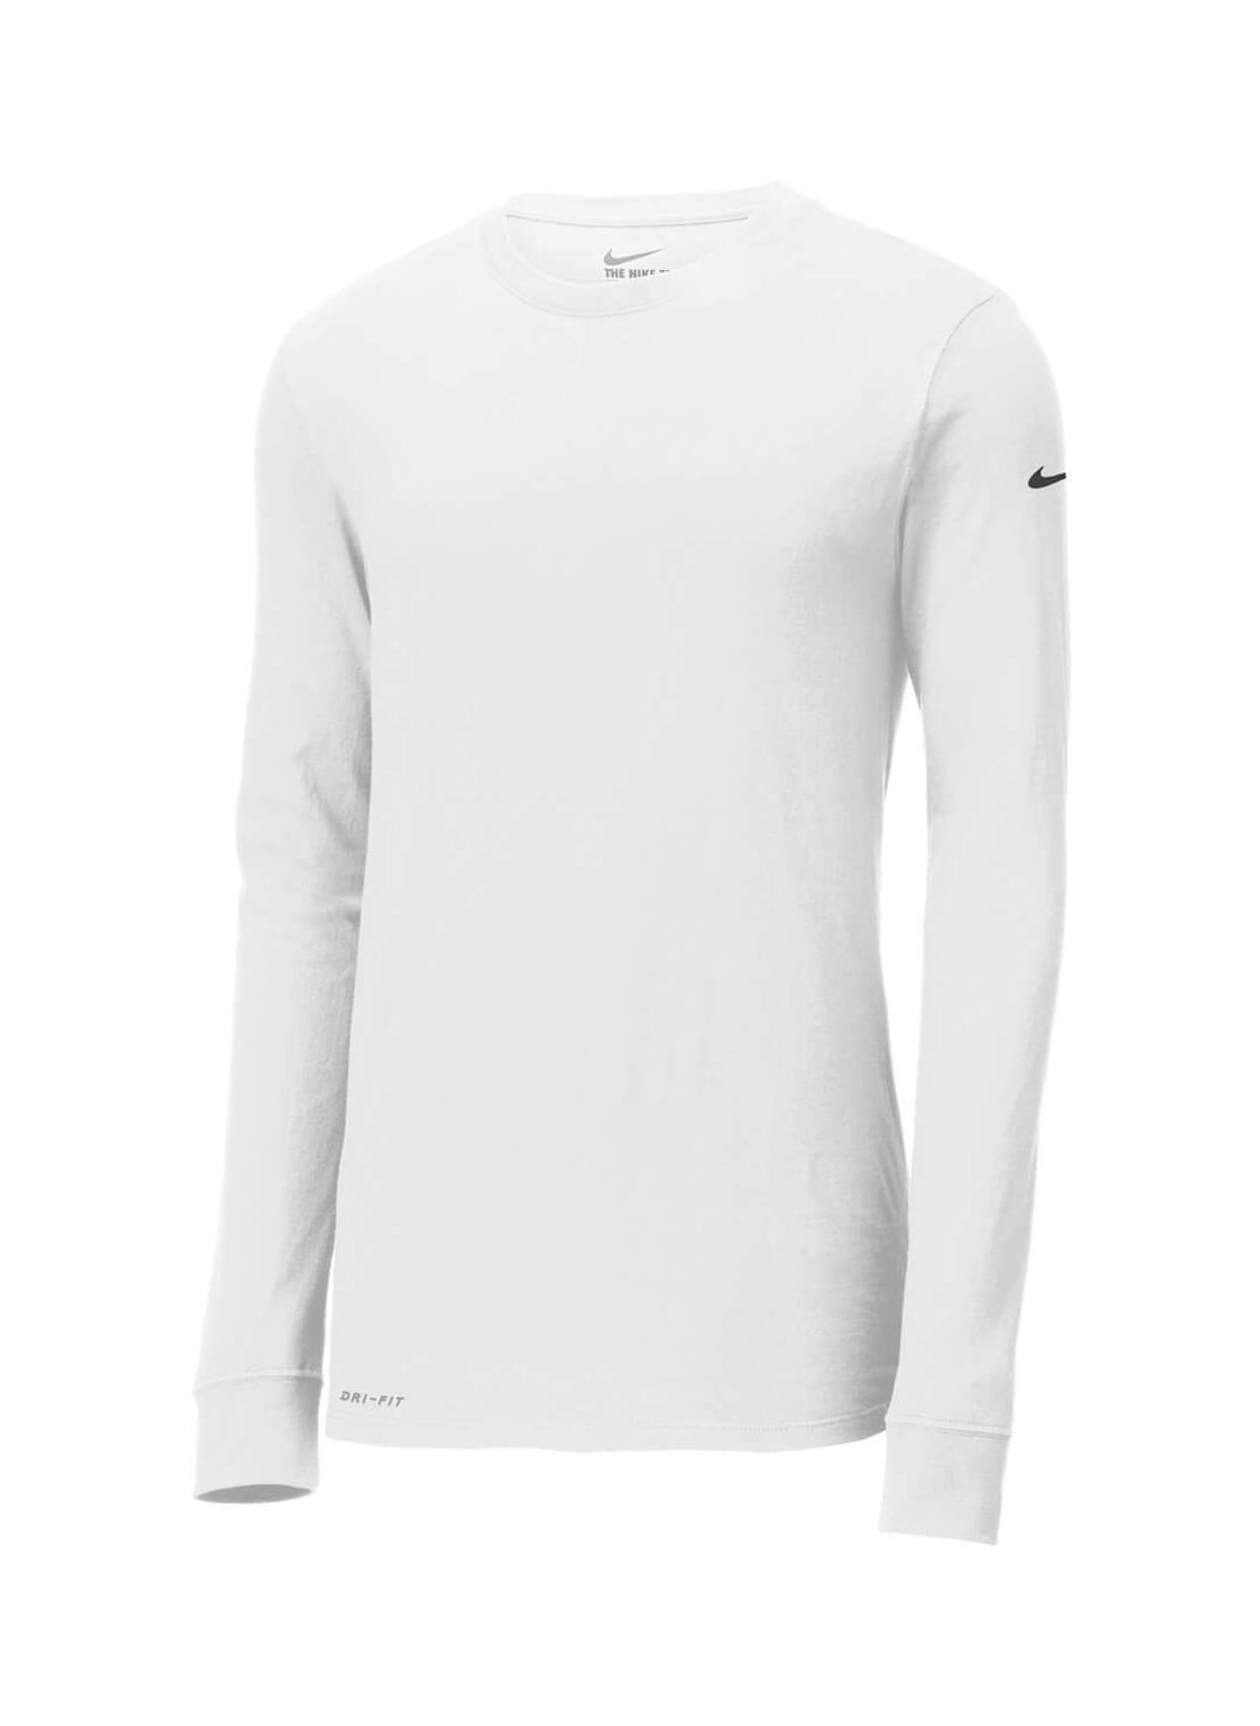 Embroidered Nike Men's White Dri-FIT Long-Sleeve T-Shirt | Company T-shirts